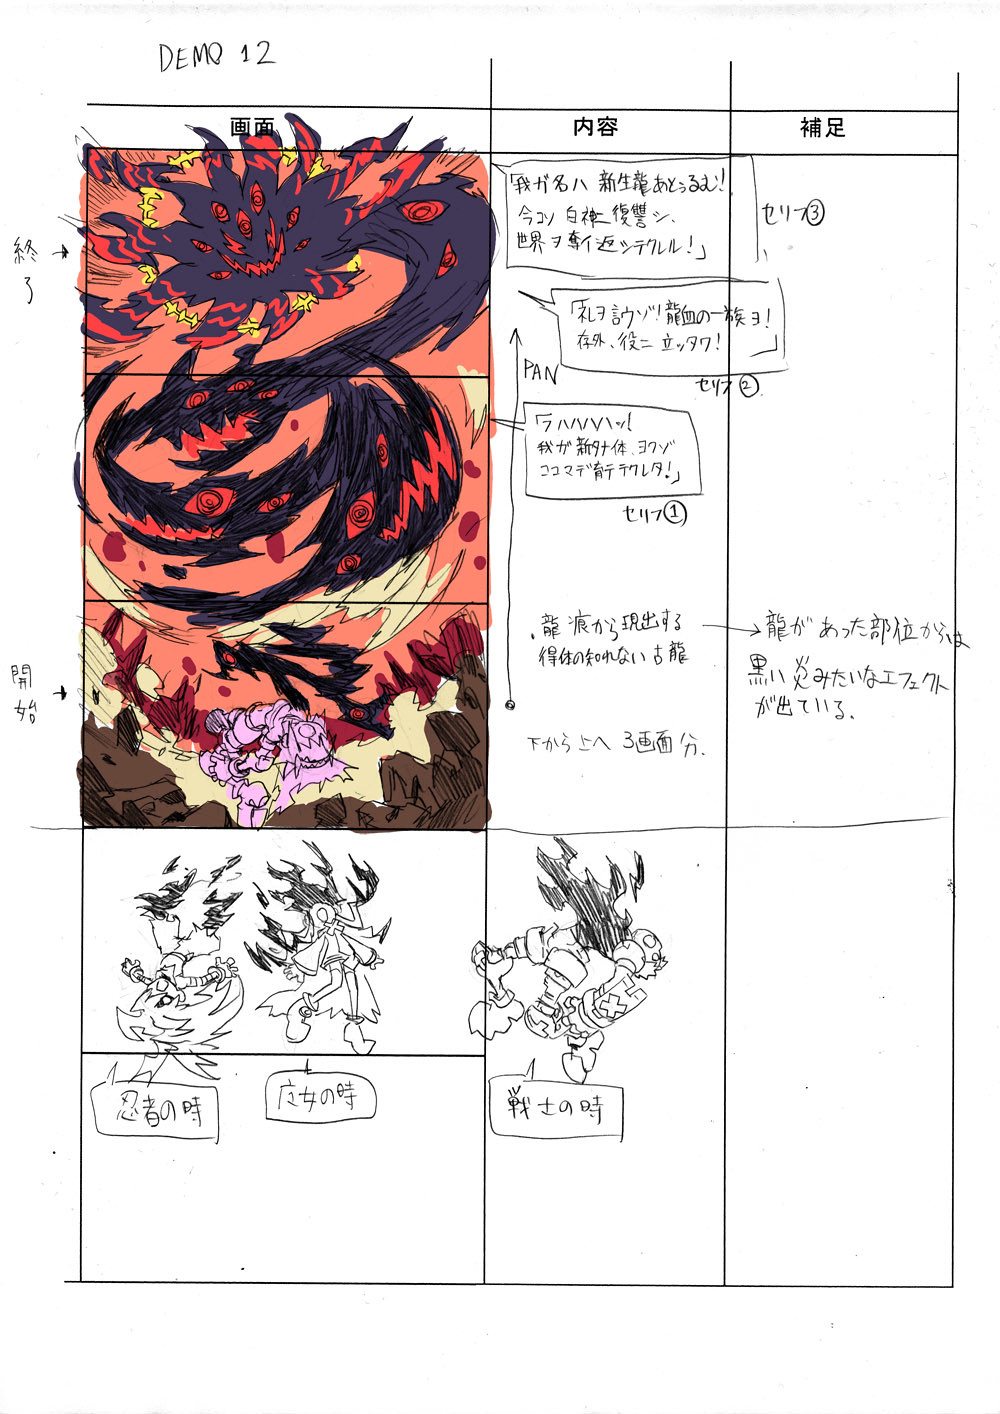 Dragon Marked for Death - Development story